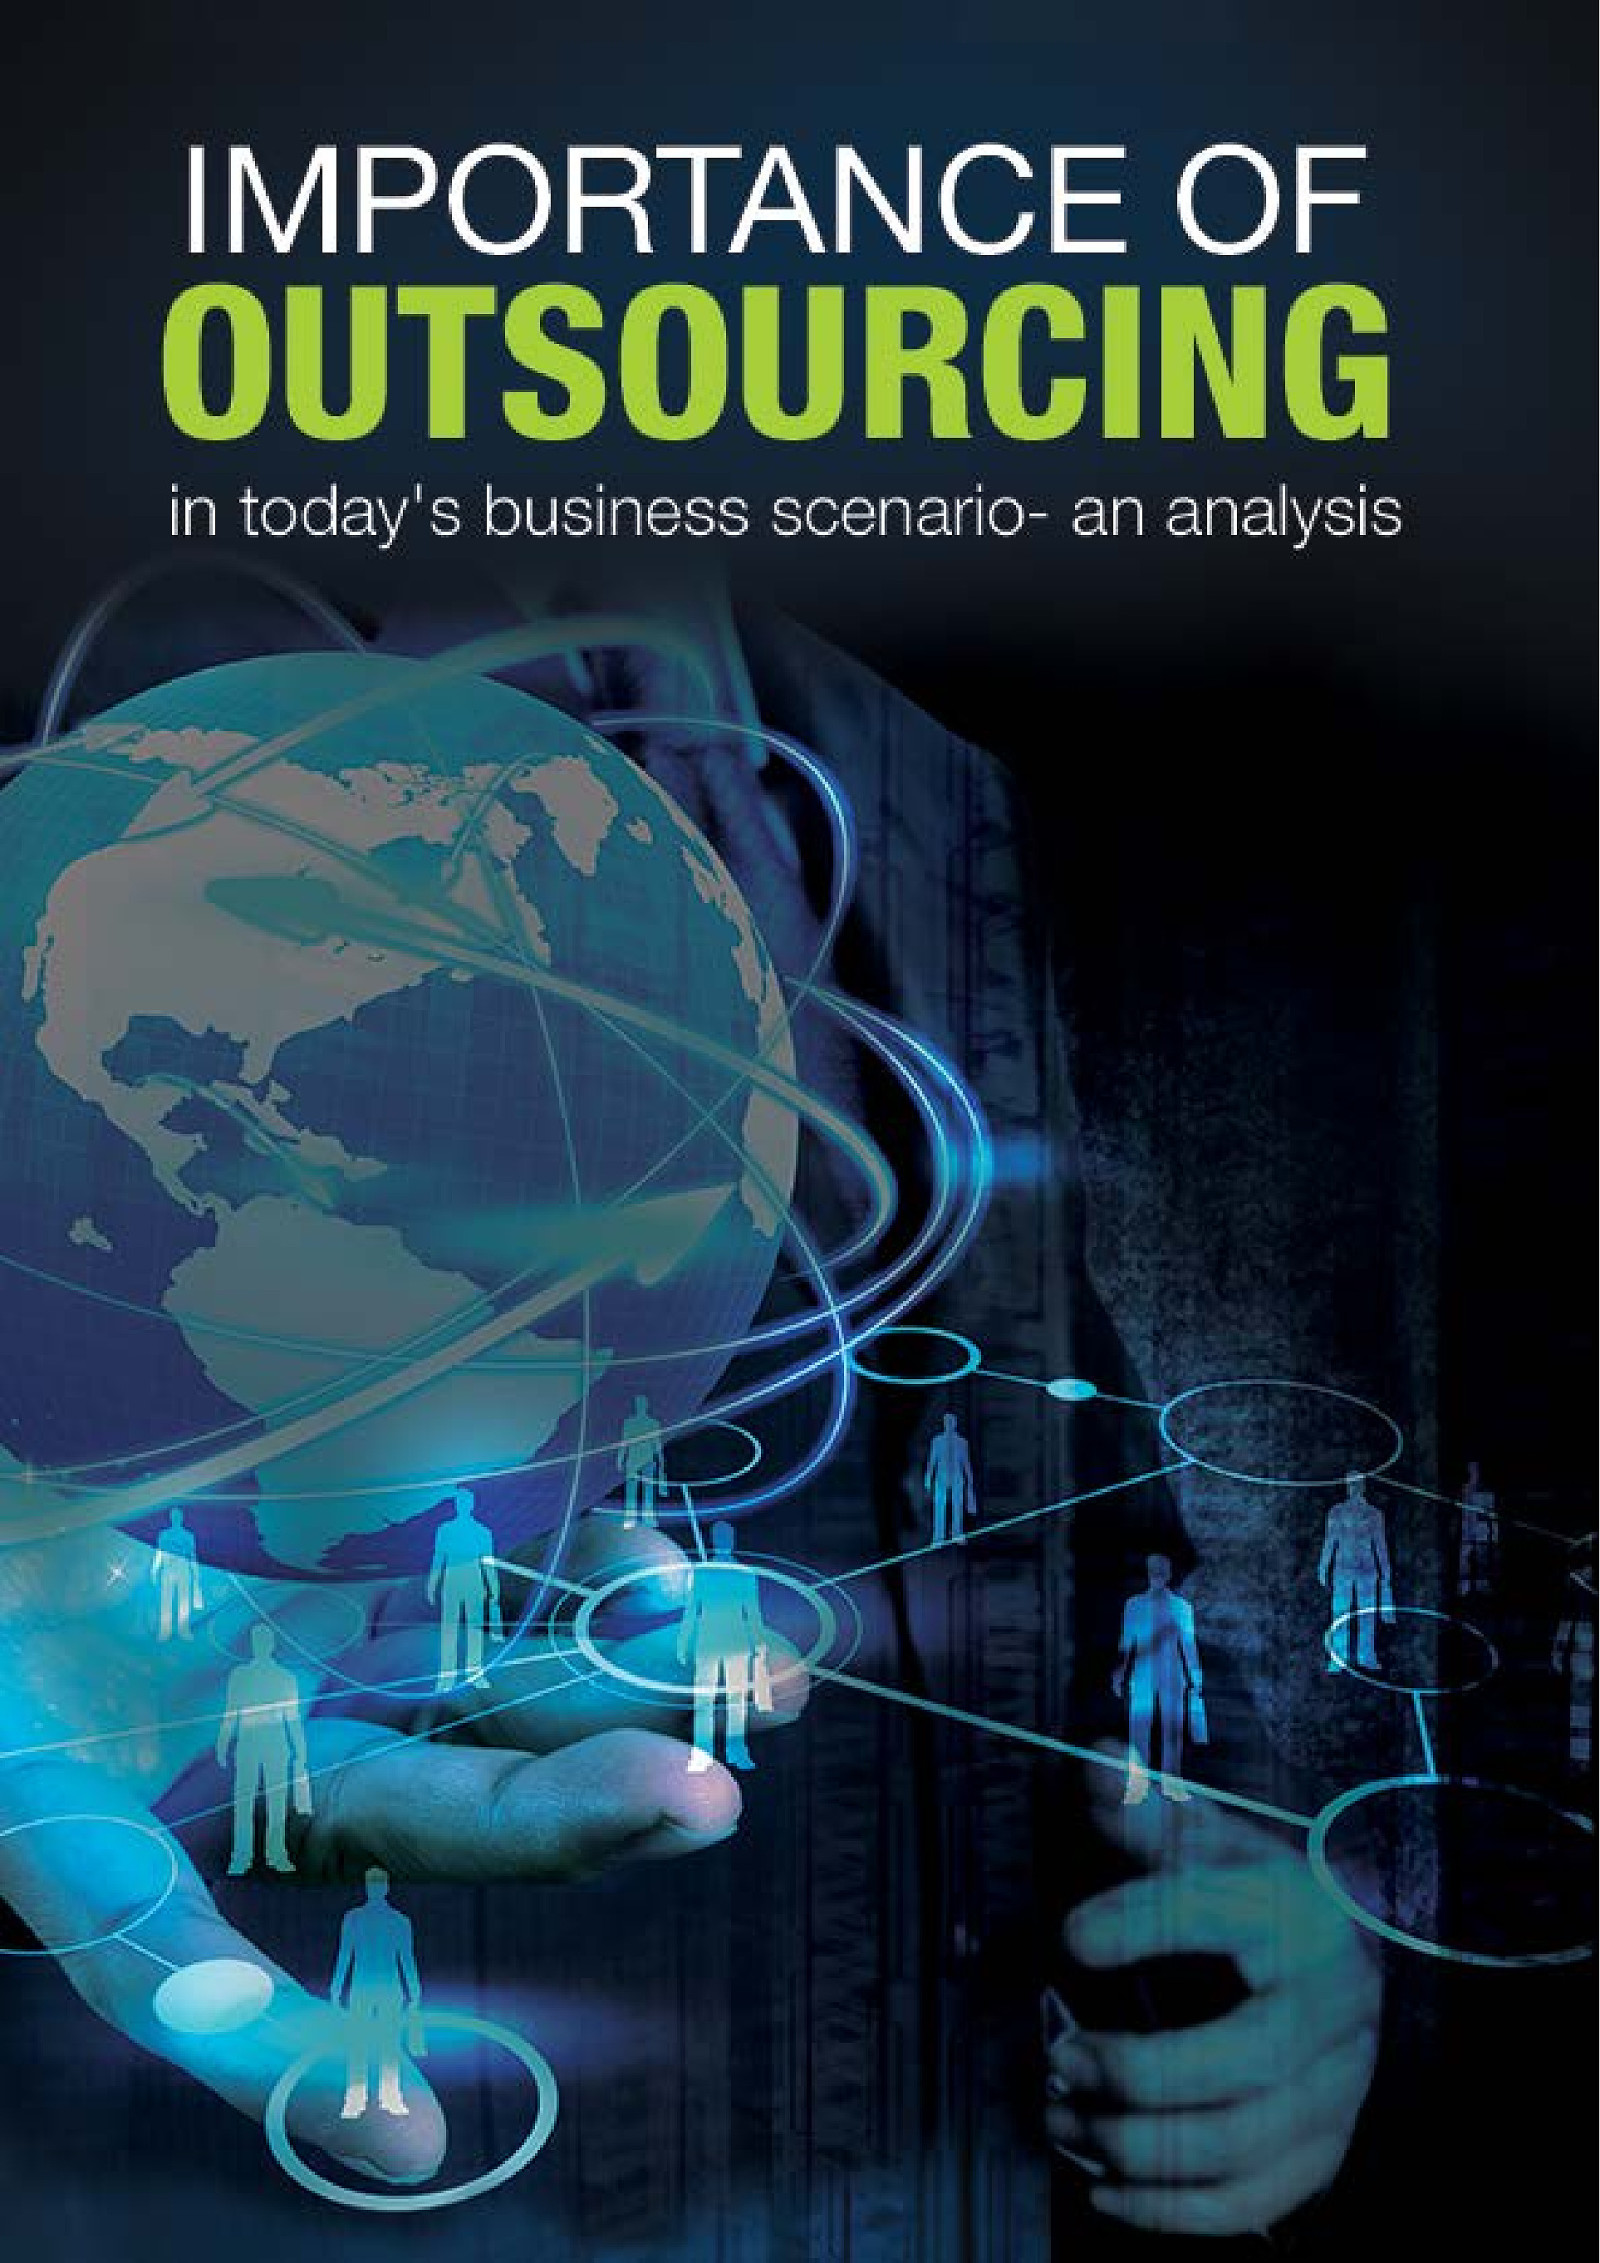 Importance of outsourcing in today’s business scenario an analysis